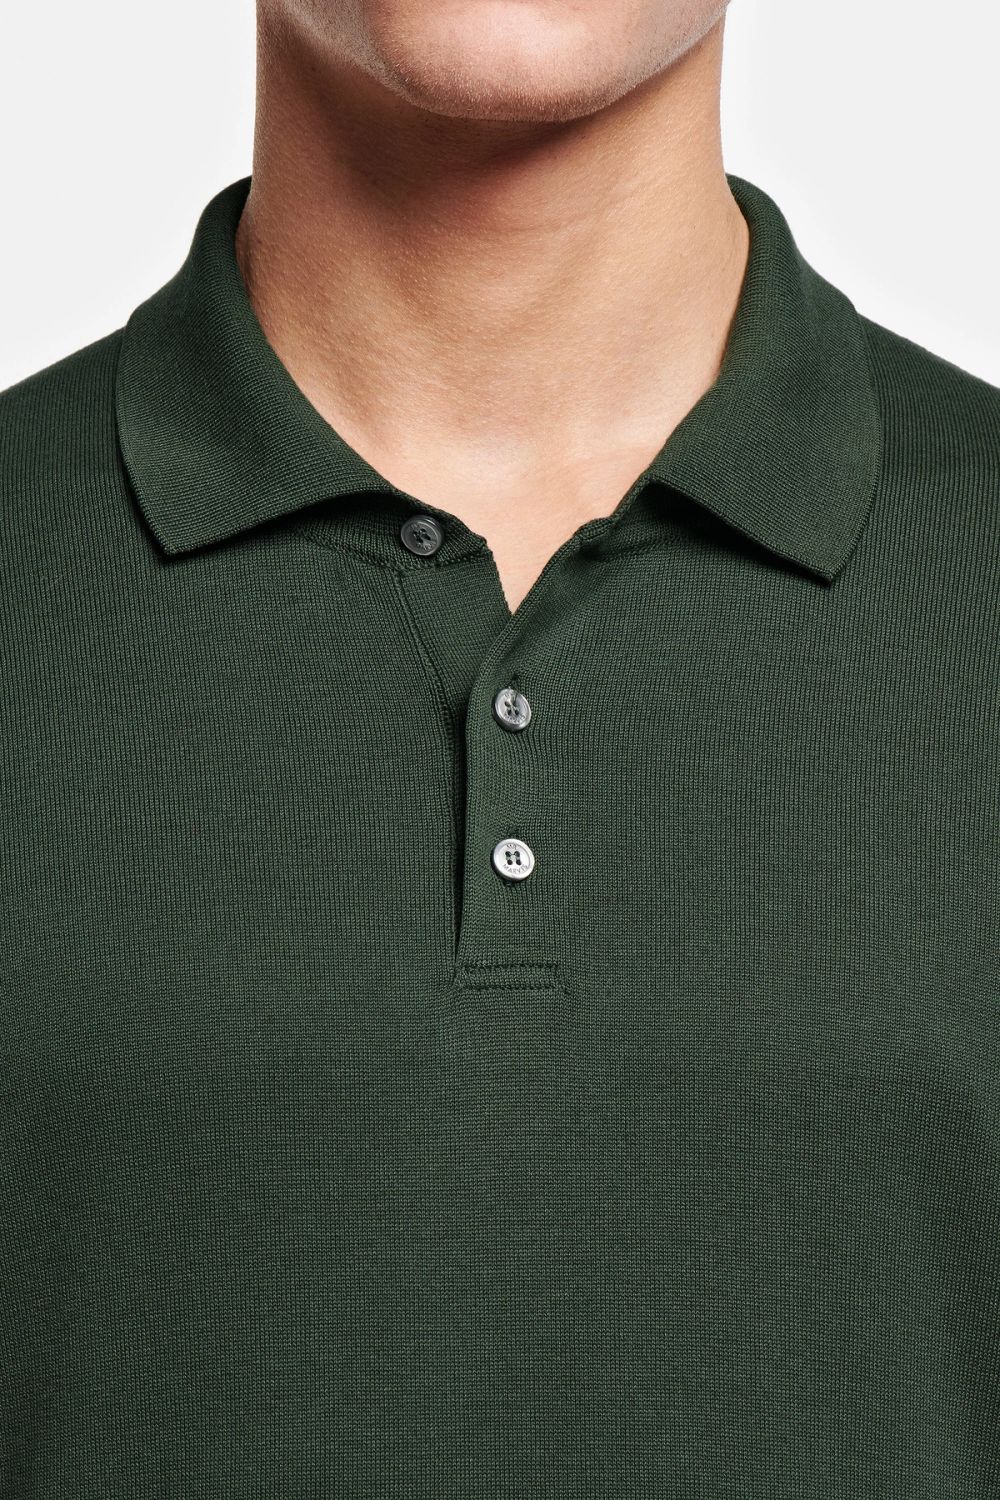 Fairways * The Knitted Polo